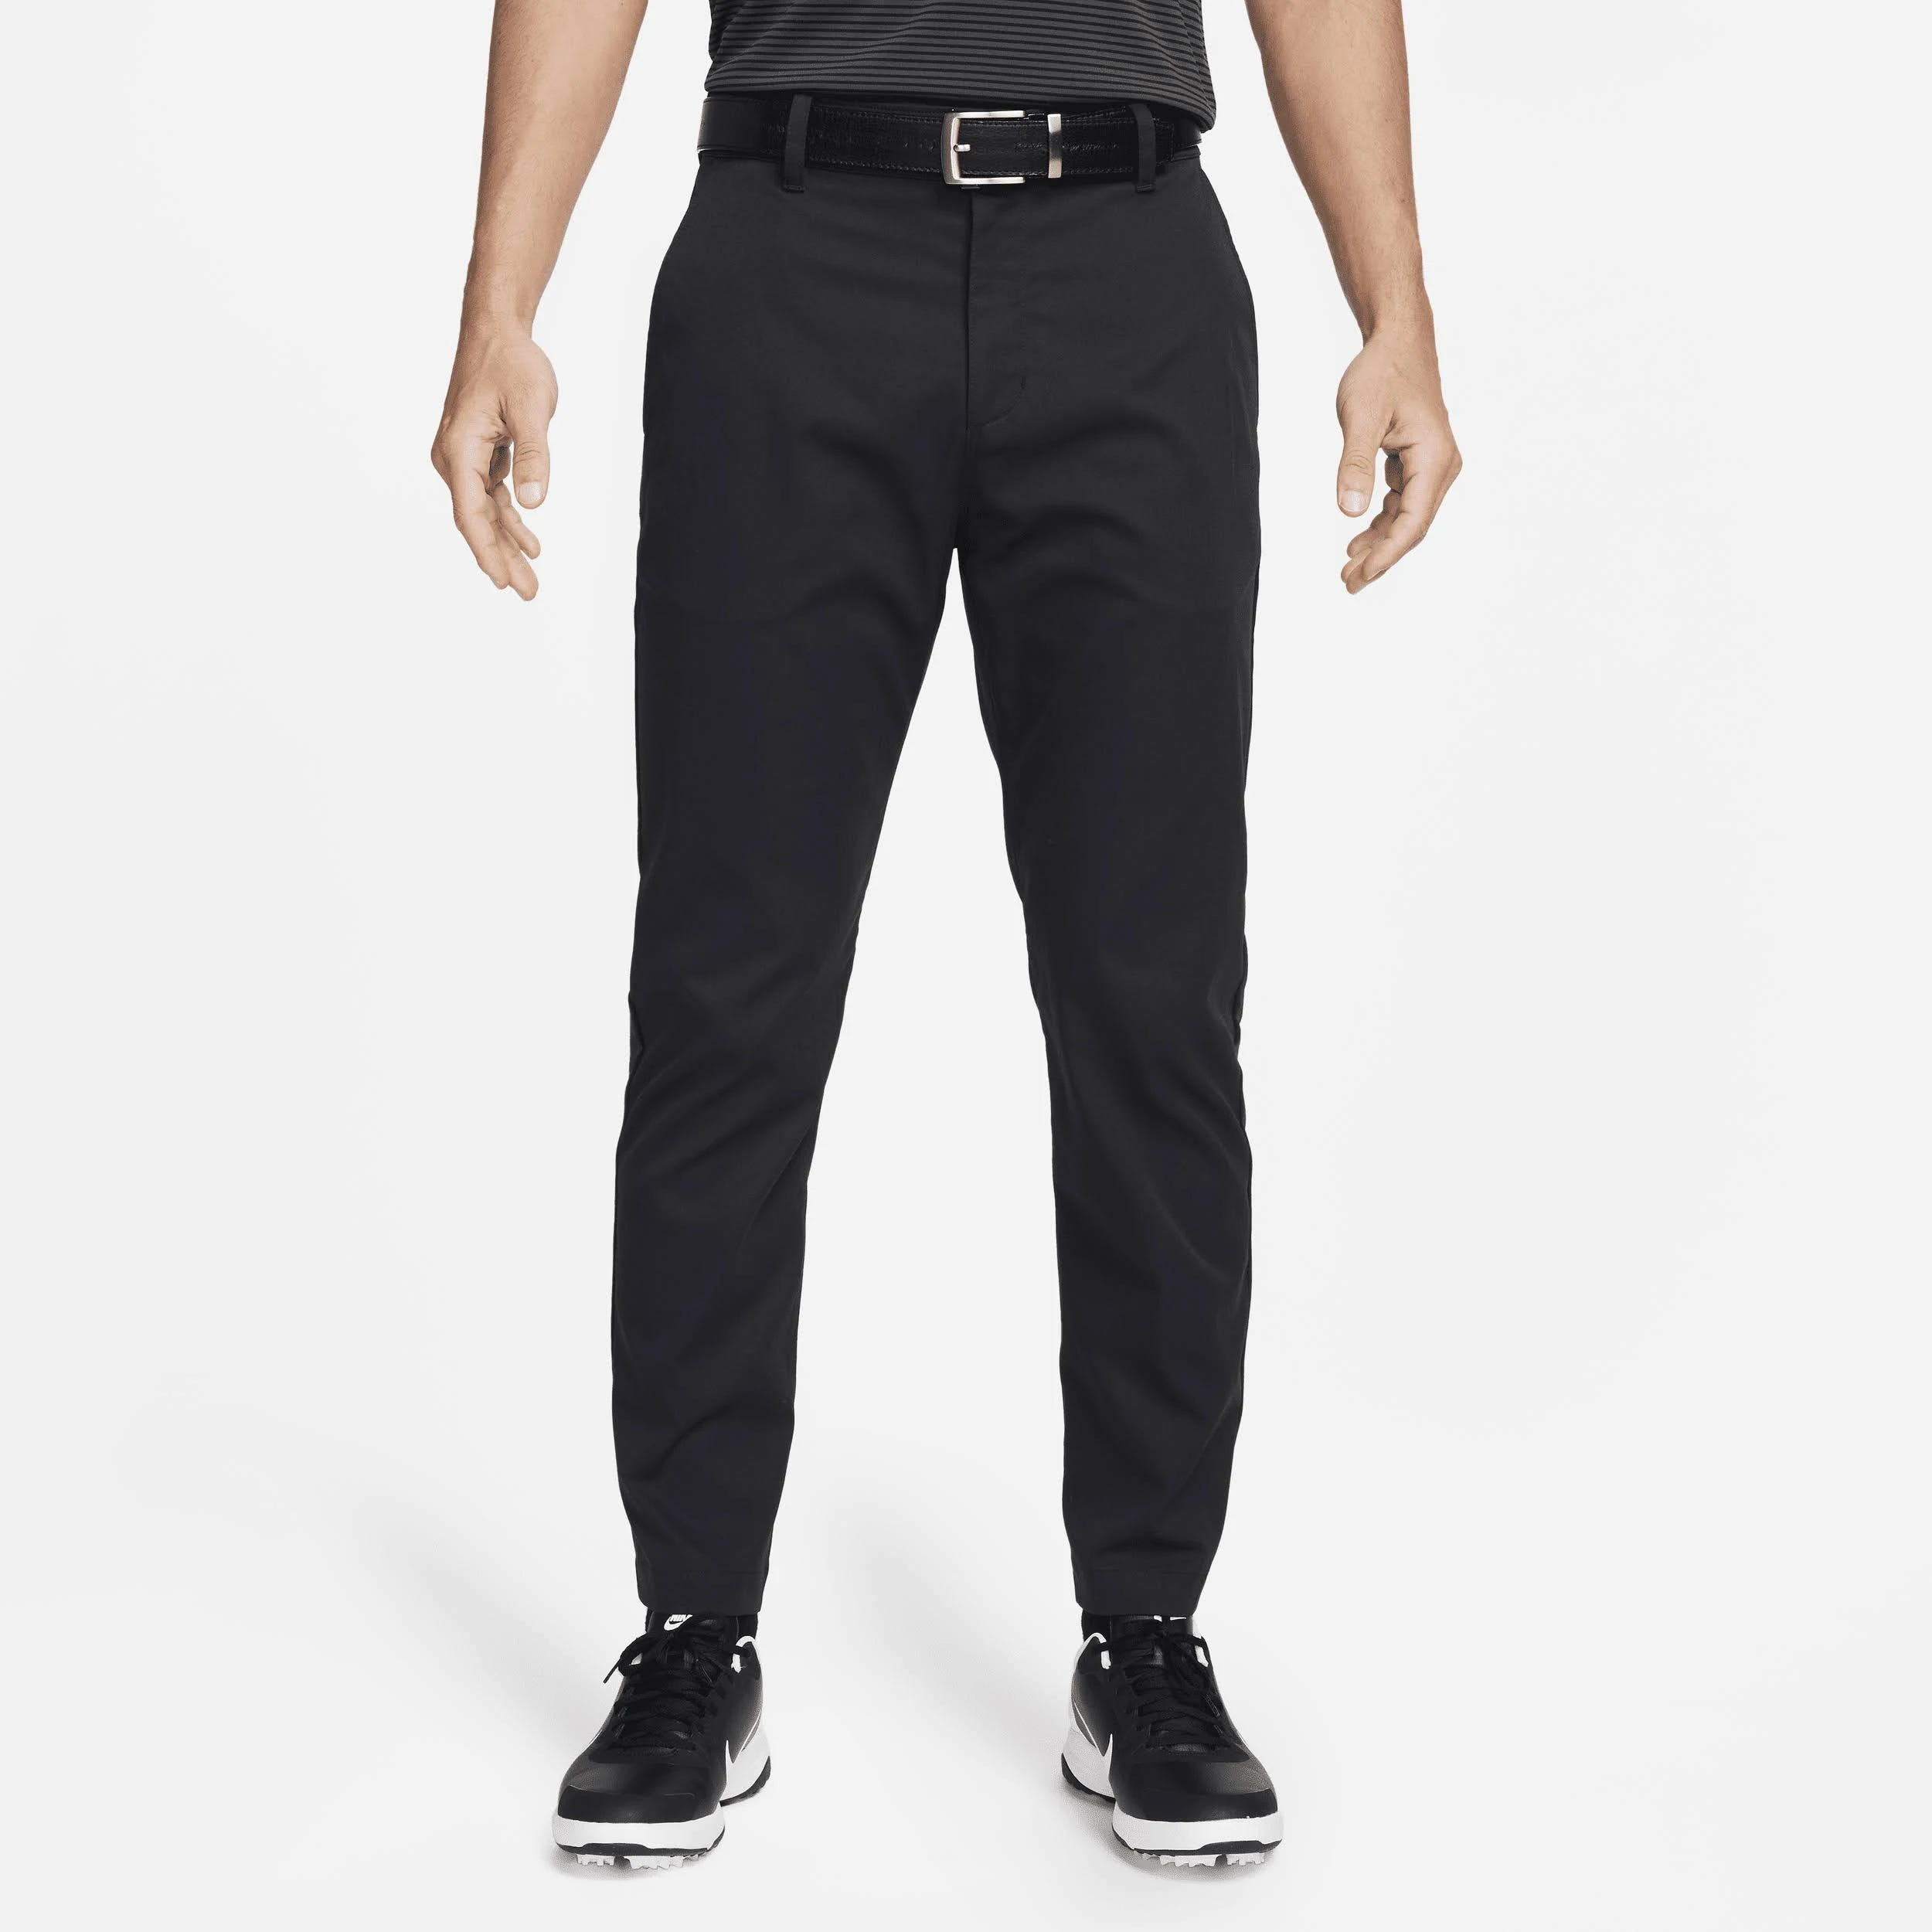 Stretch-Woven Nike Golf Pants with Water-Repellent Finish | Image